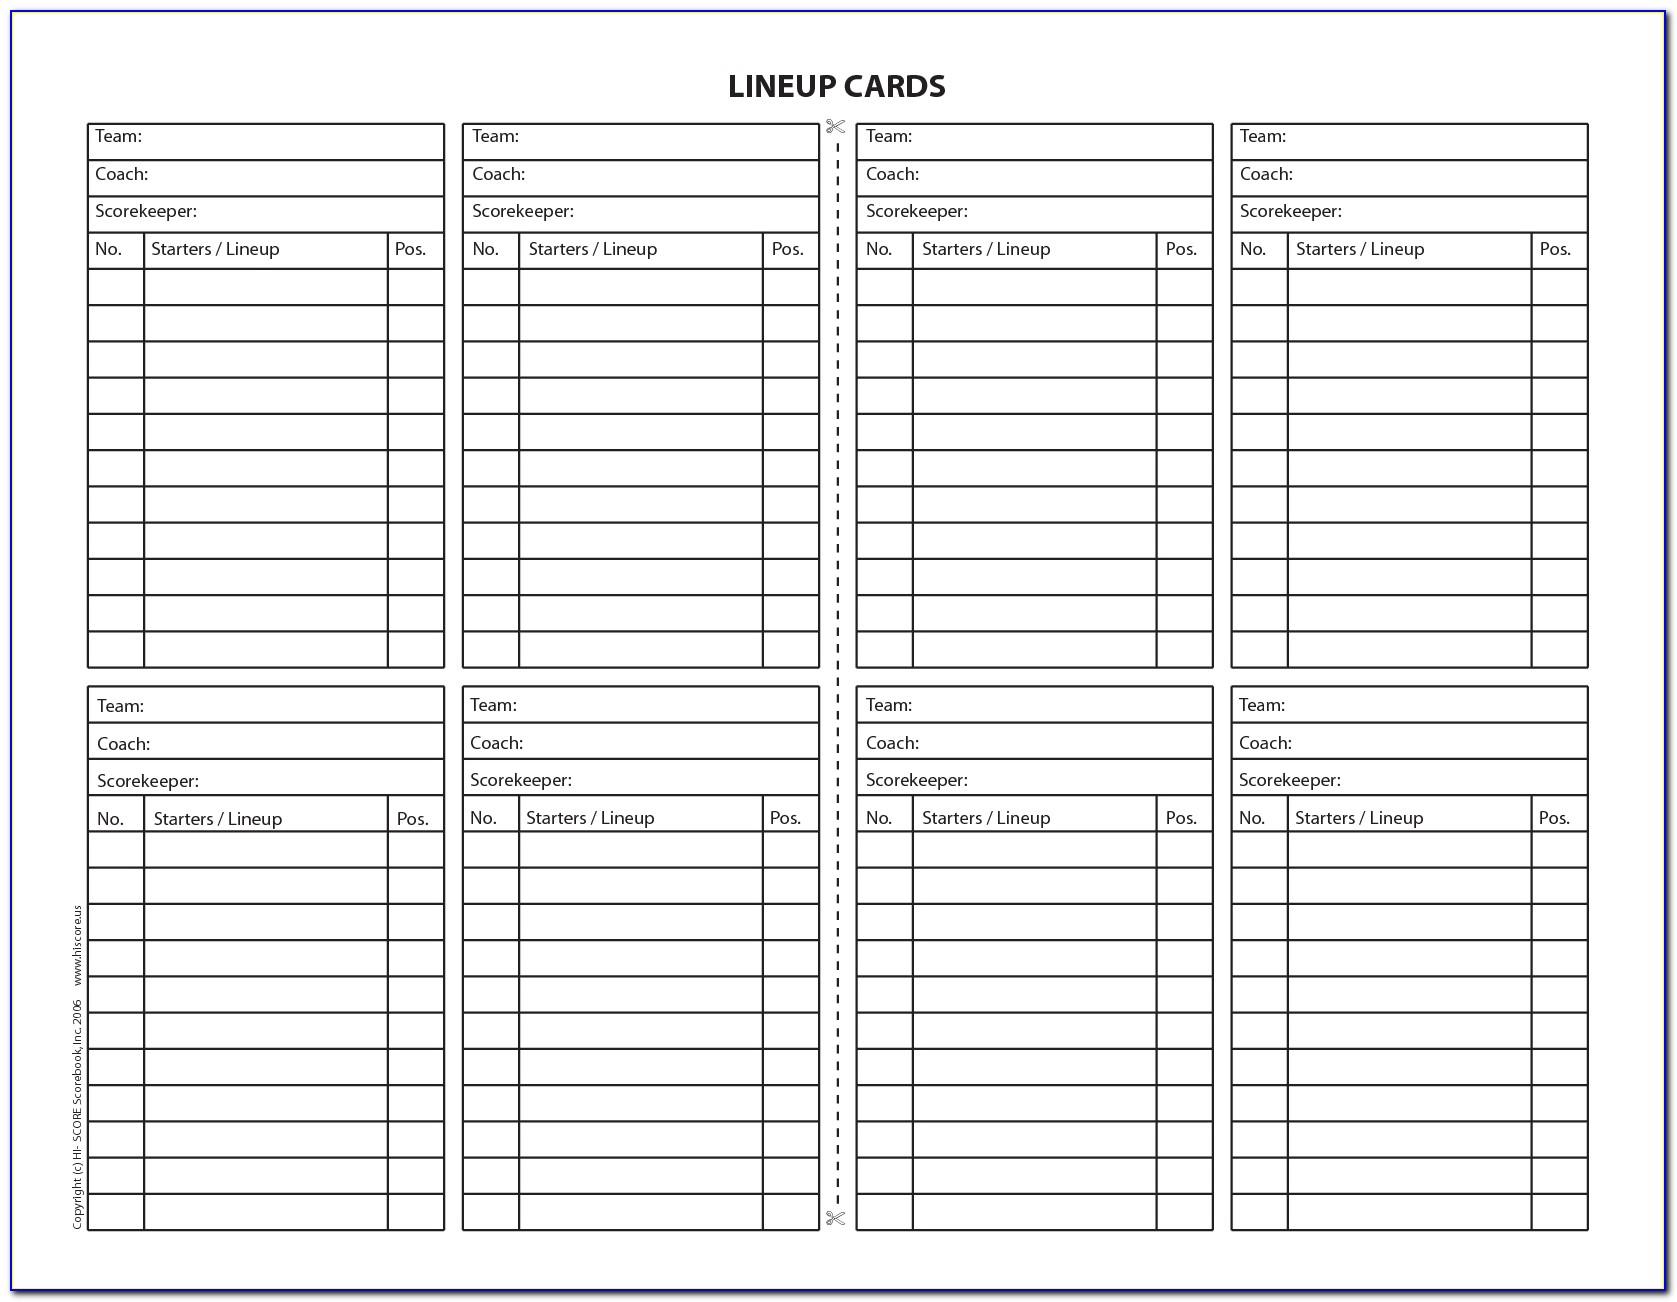 baseball-lineup-card-template-excel-cards-resume-examples-jvdx2mb8ov